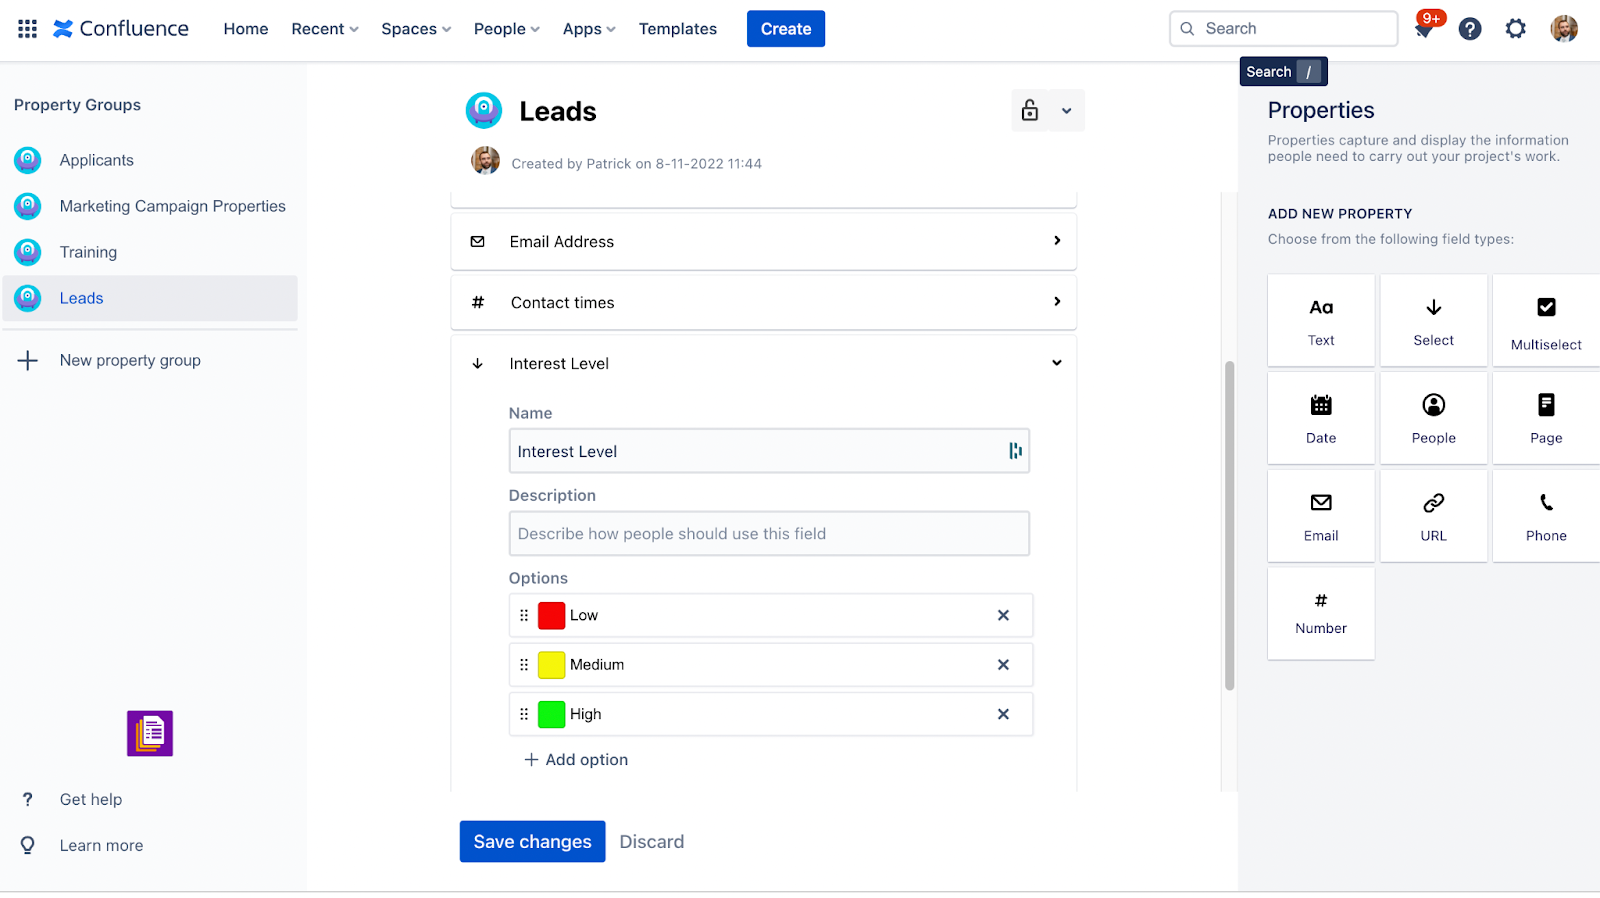 Document your leads from the first contact in Confluence Cloud - image showing a property group set up for a new lead with information like email address, contact times and interest level